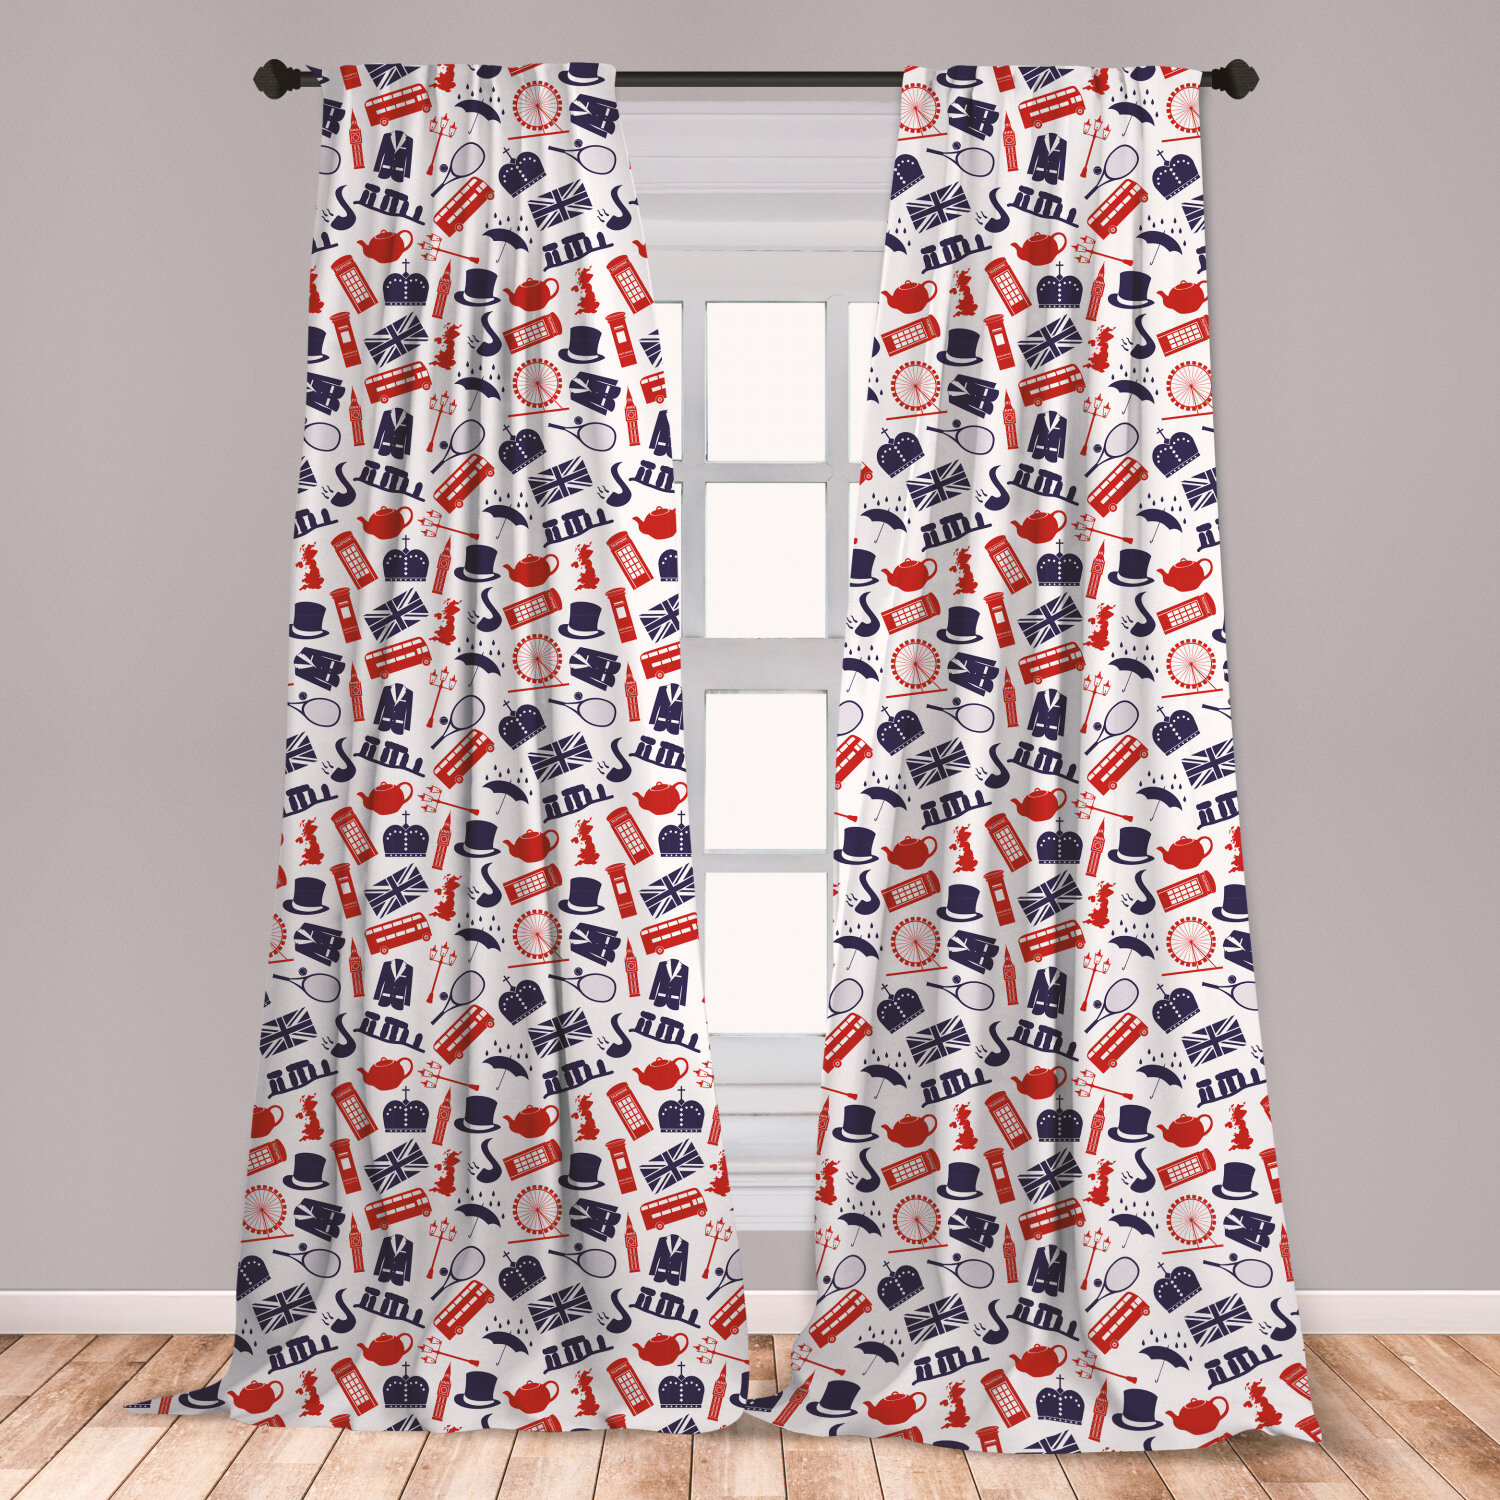 red patterned curtain fabric